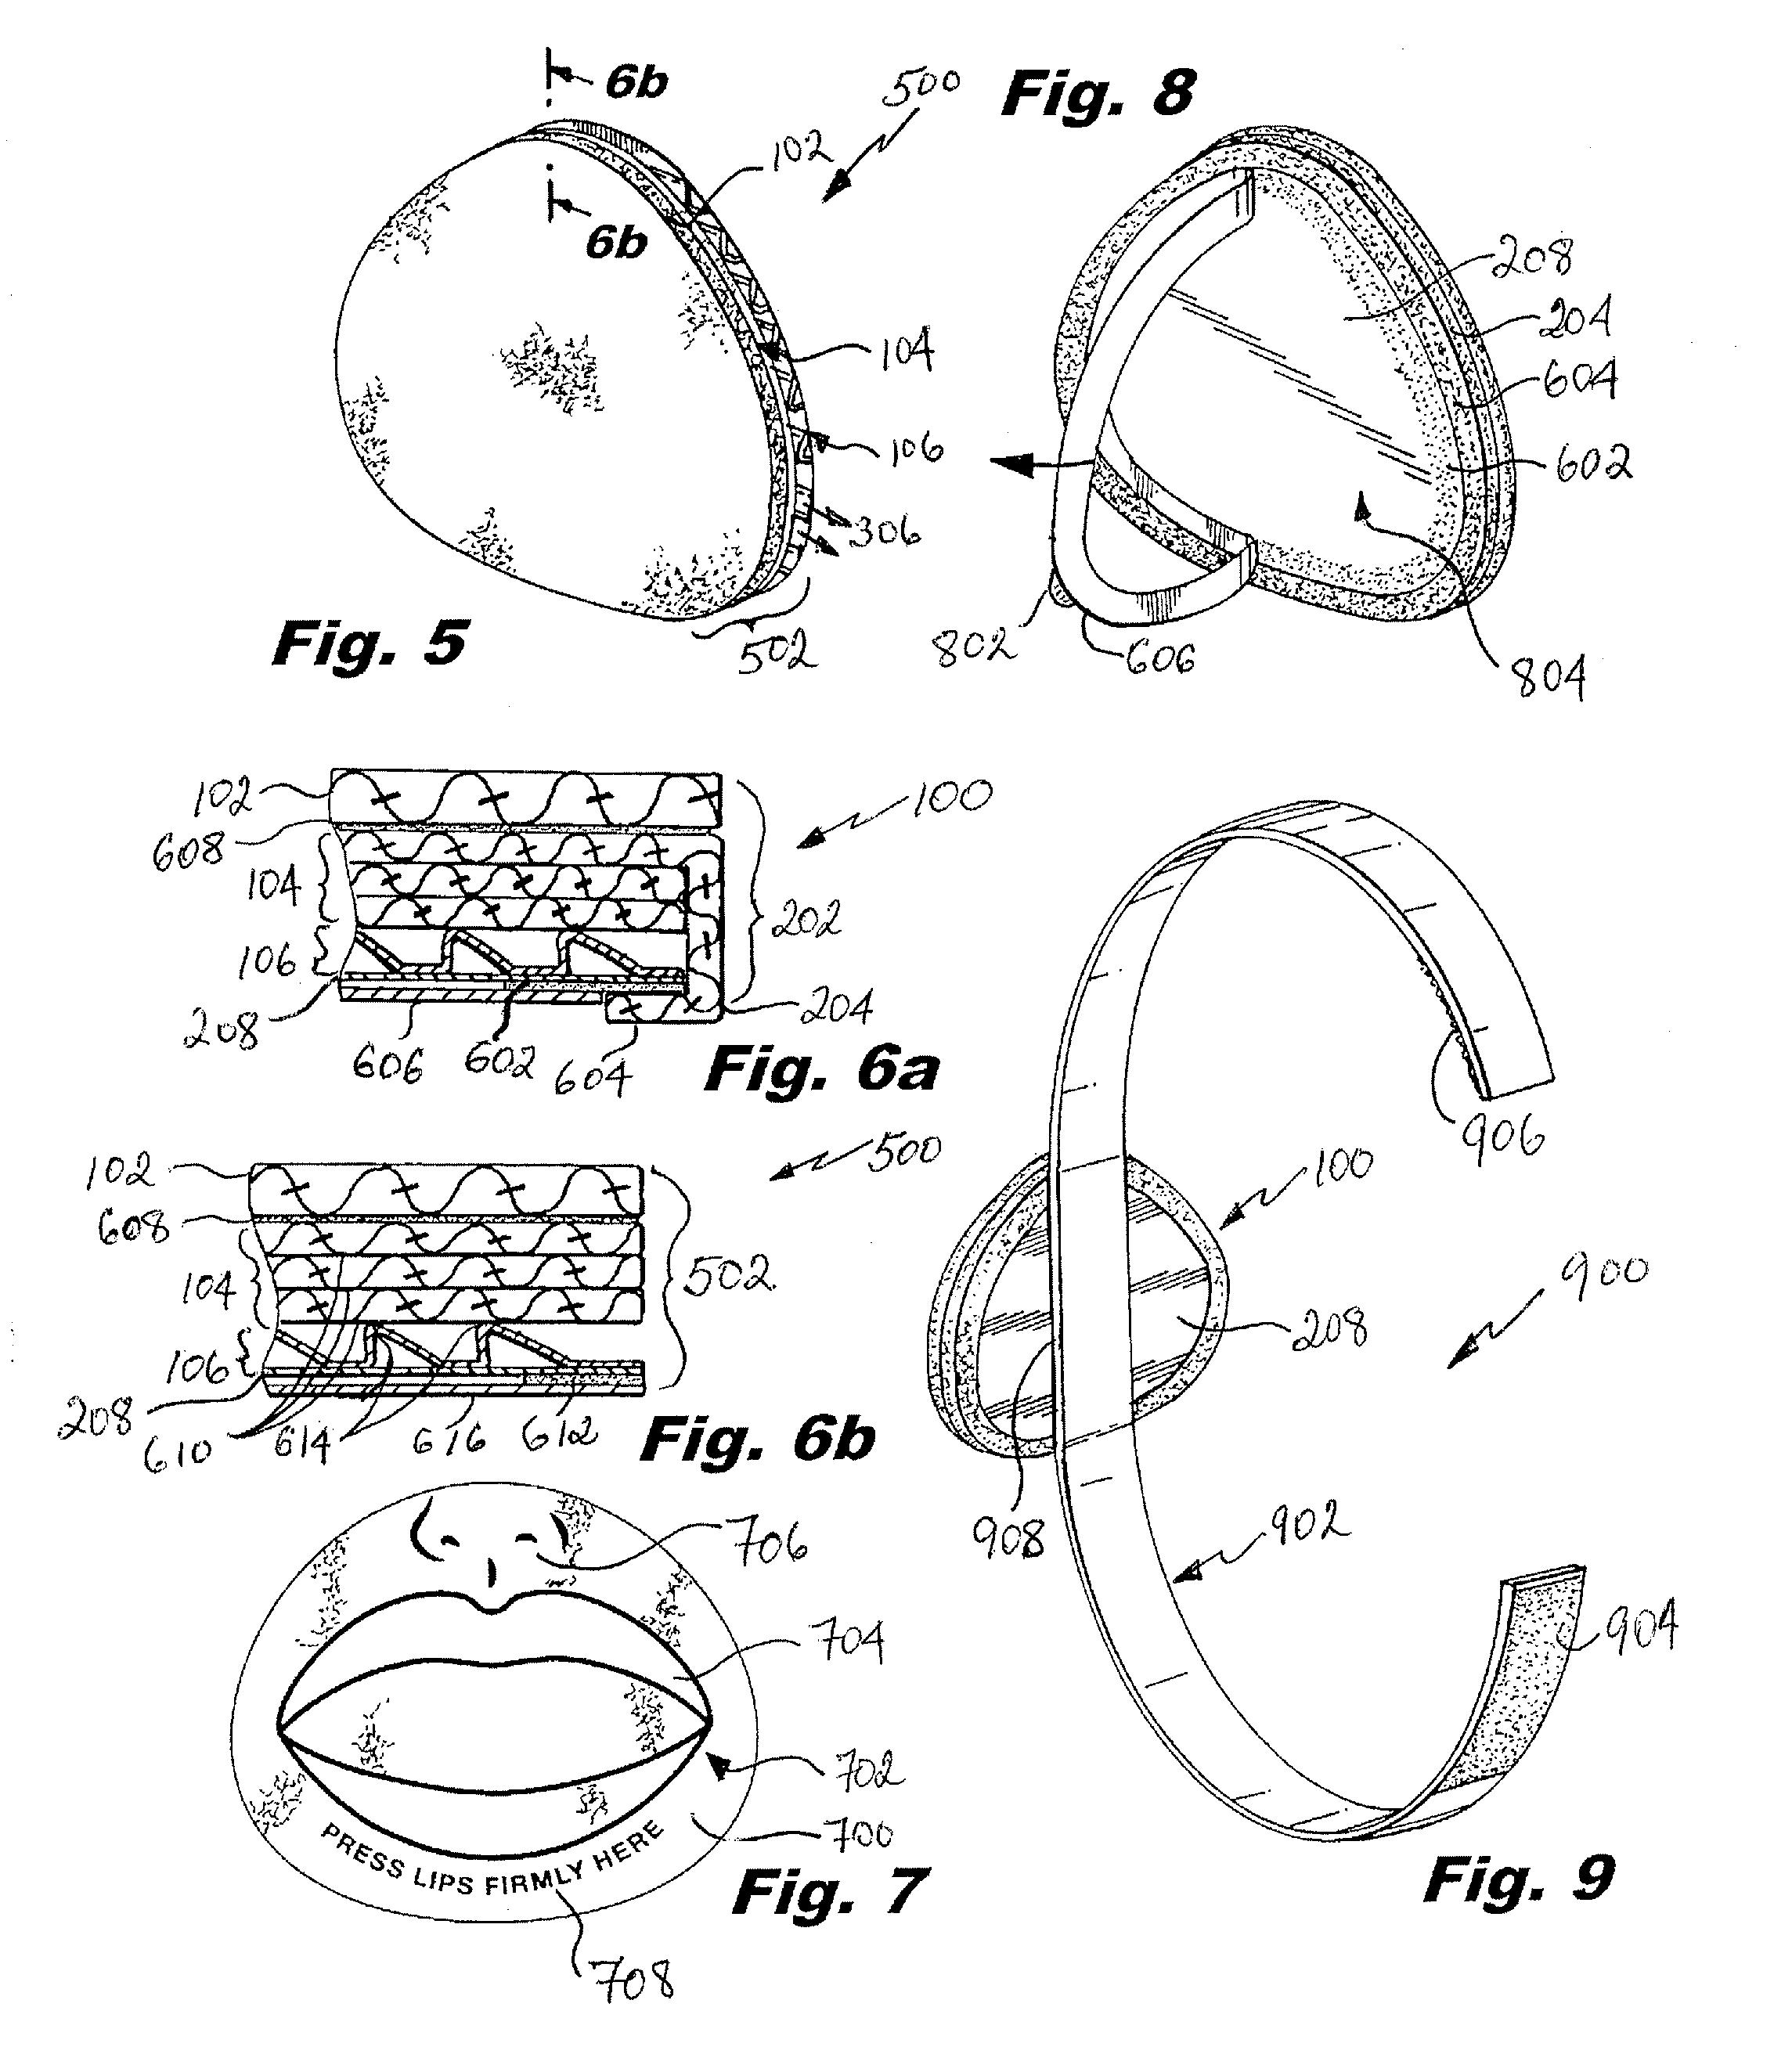 Apparatus with Exhaust Spacer to Improve Filtration of Pathogens in Respiratory Emissions of Sneezes